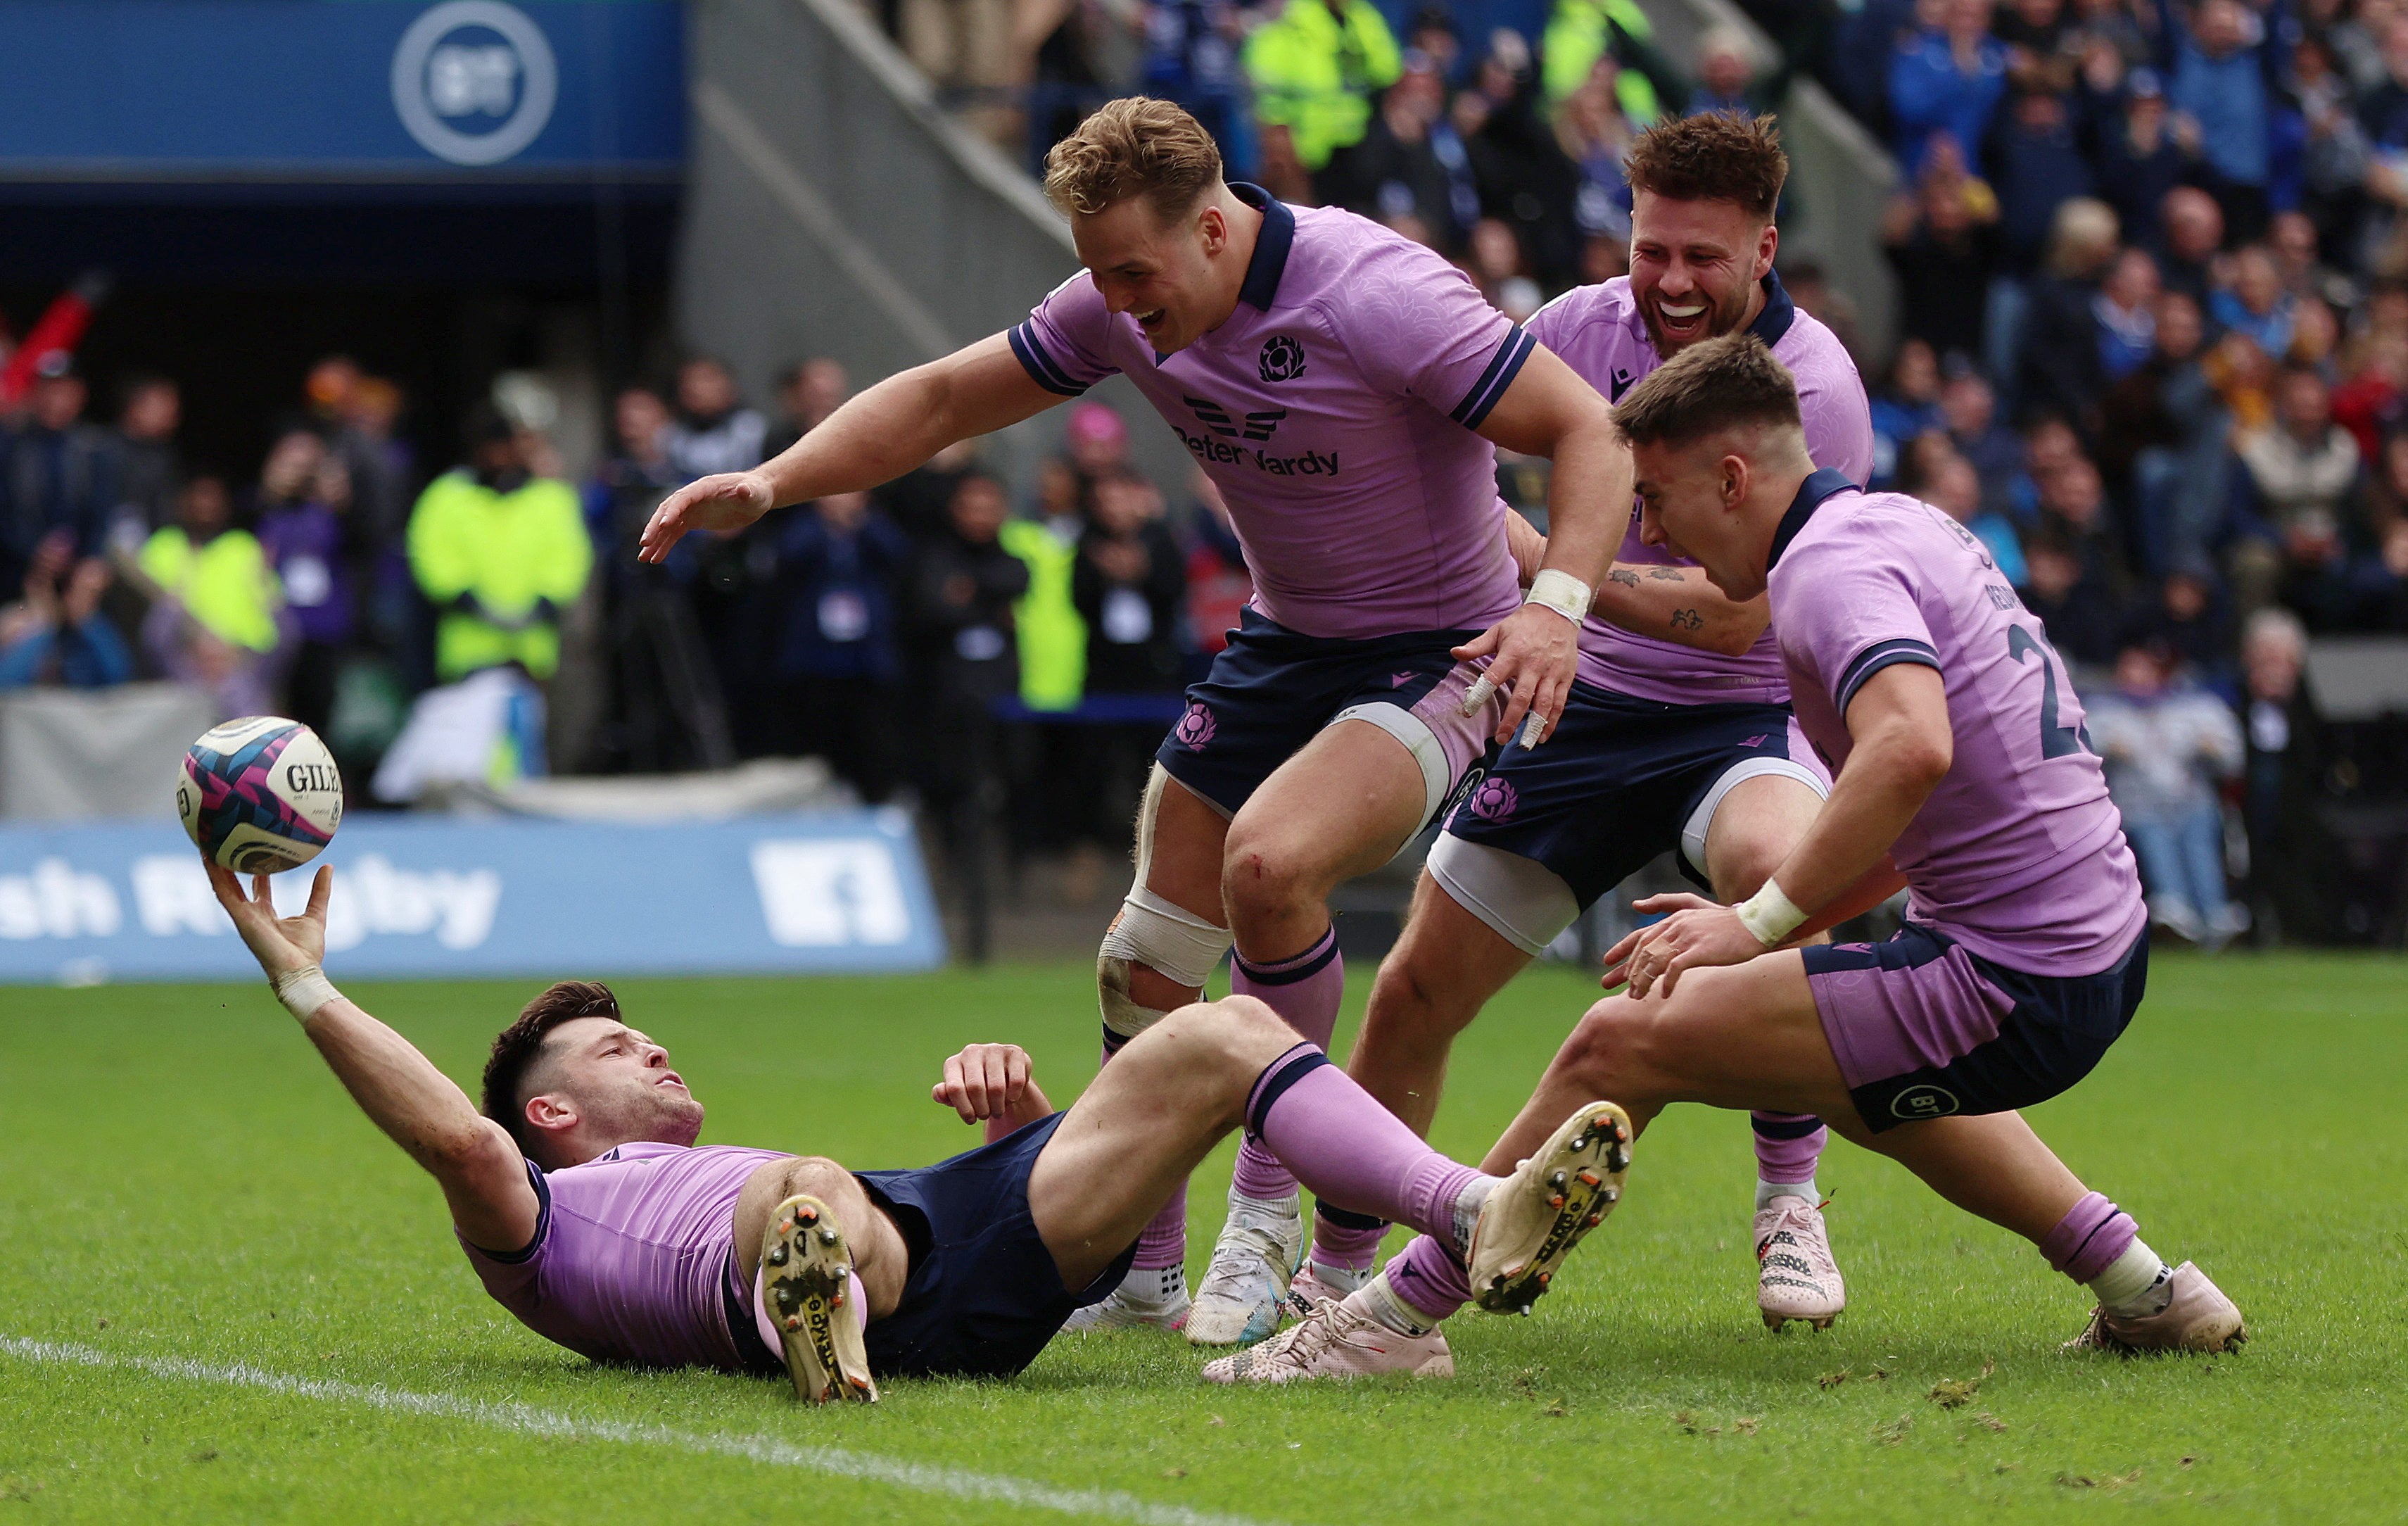 Scotland held on to defeat Italy at Murrayfield